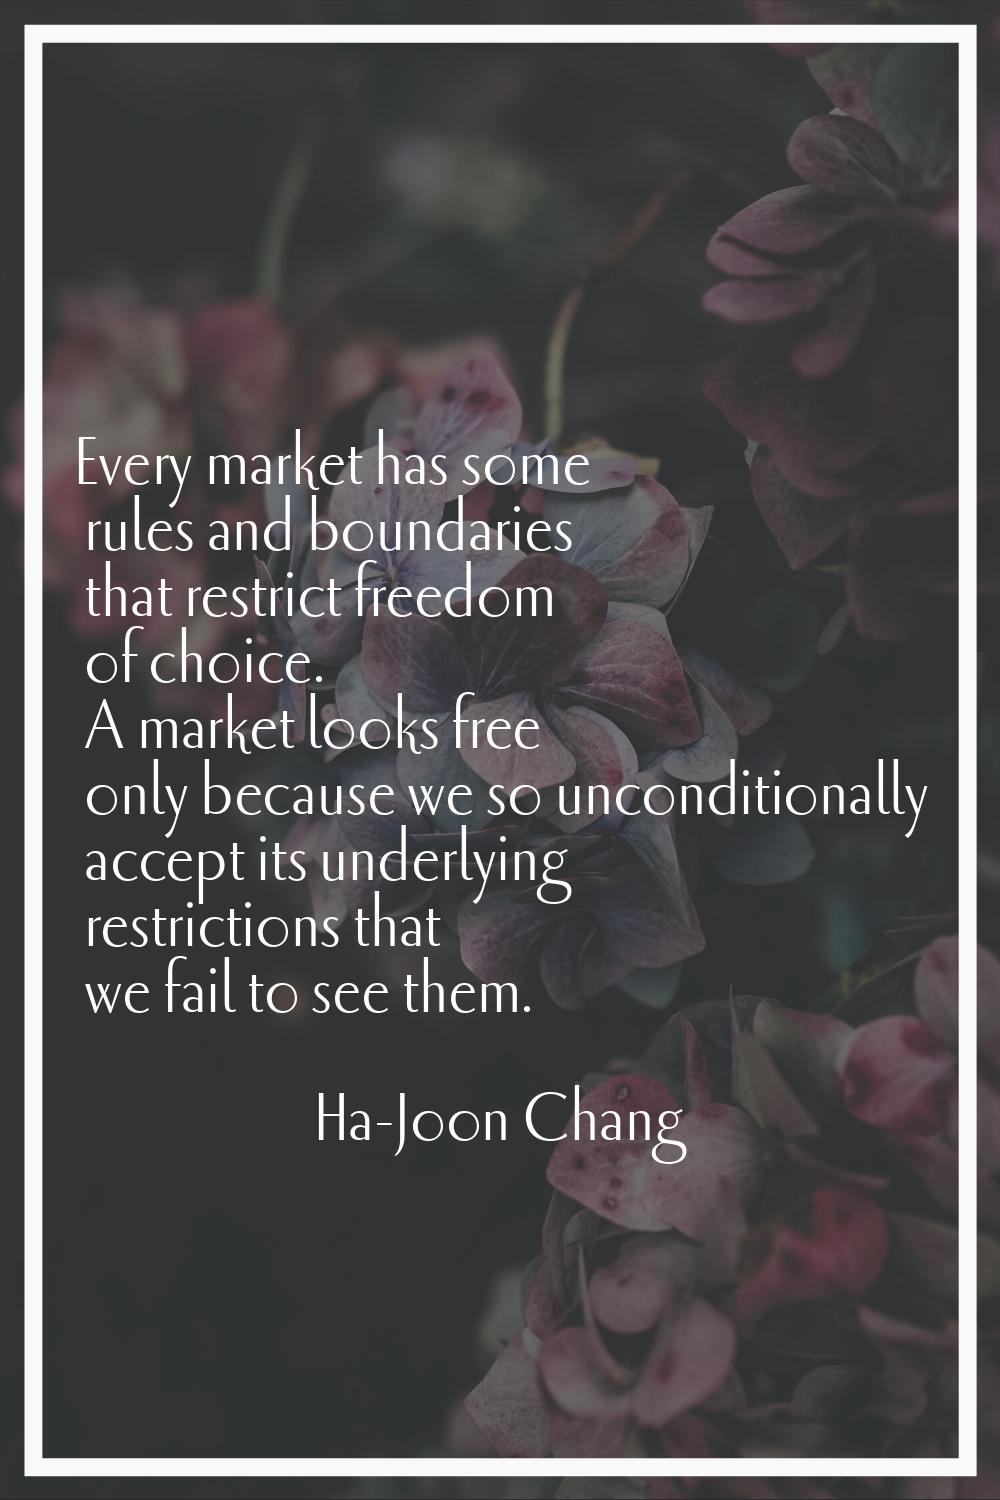 Every market has some rules and boundaries that restrict freedom of choice. A market looks free onl